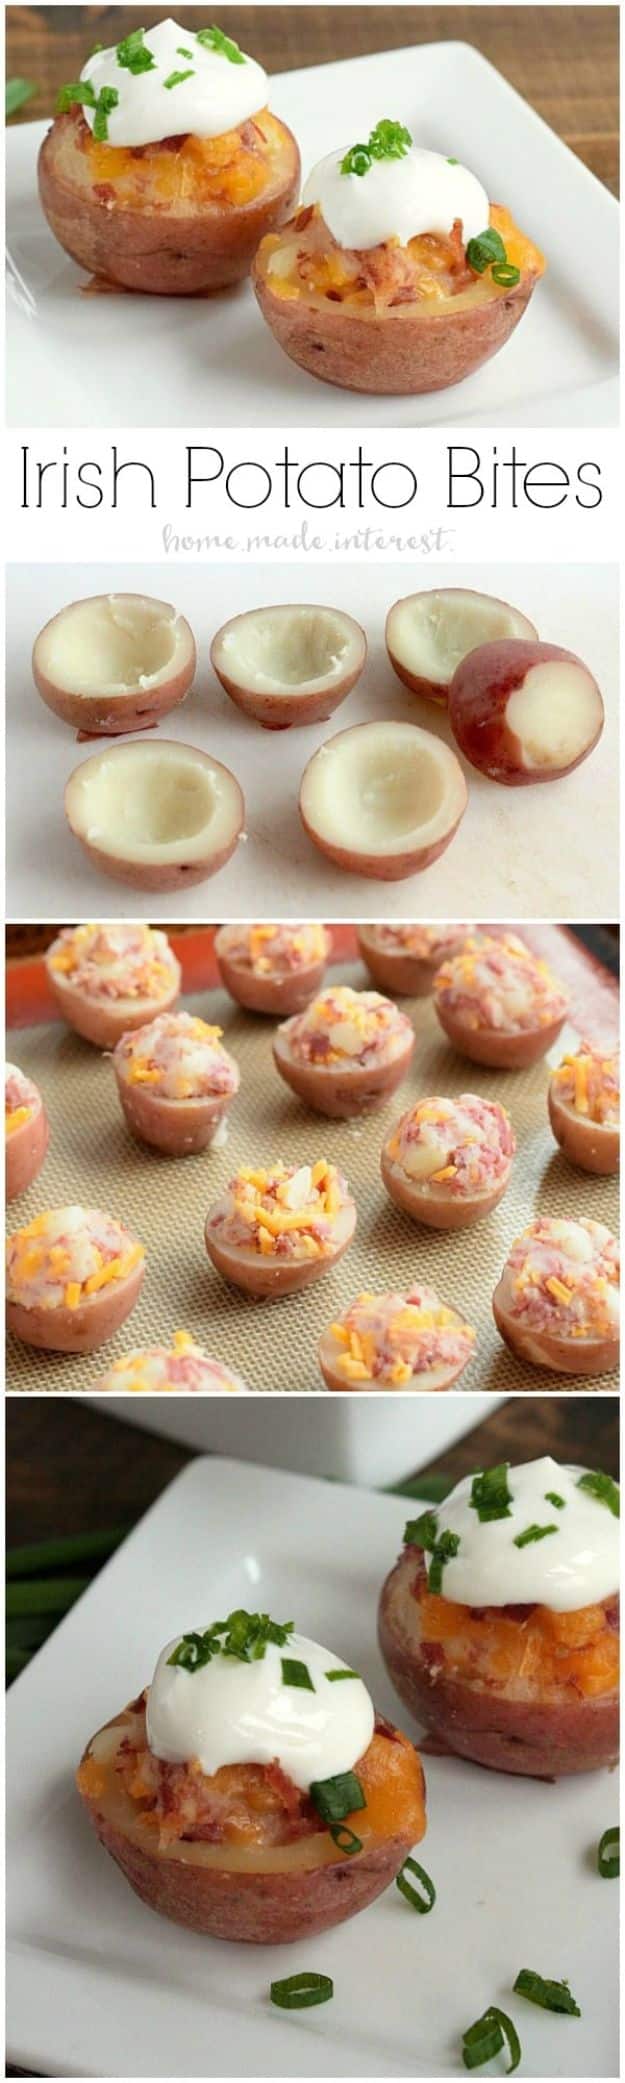 St Patrick's Day Food and Recipe Ideas - Irish Potato Bites - DIY St. Patrick's Day Party Recipes for Dinner, Desserts, Cookies, Cakes, Snacks, Dips and Drinks - Green Shamrocks, Leprechauns and Cute Party Foods - Easy Appetizers and Healthy Treats for Adults and Kids To Make - Potluck, Crockpot, Traditional and Corned Beef http://diyjoy.com/st-patricks-day-recipes